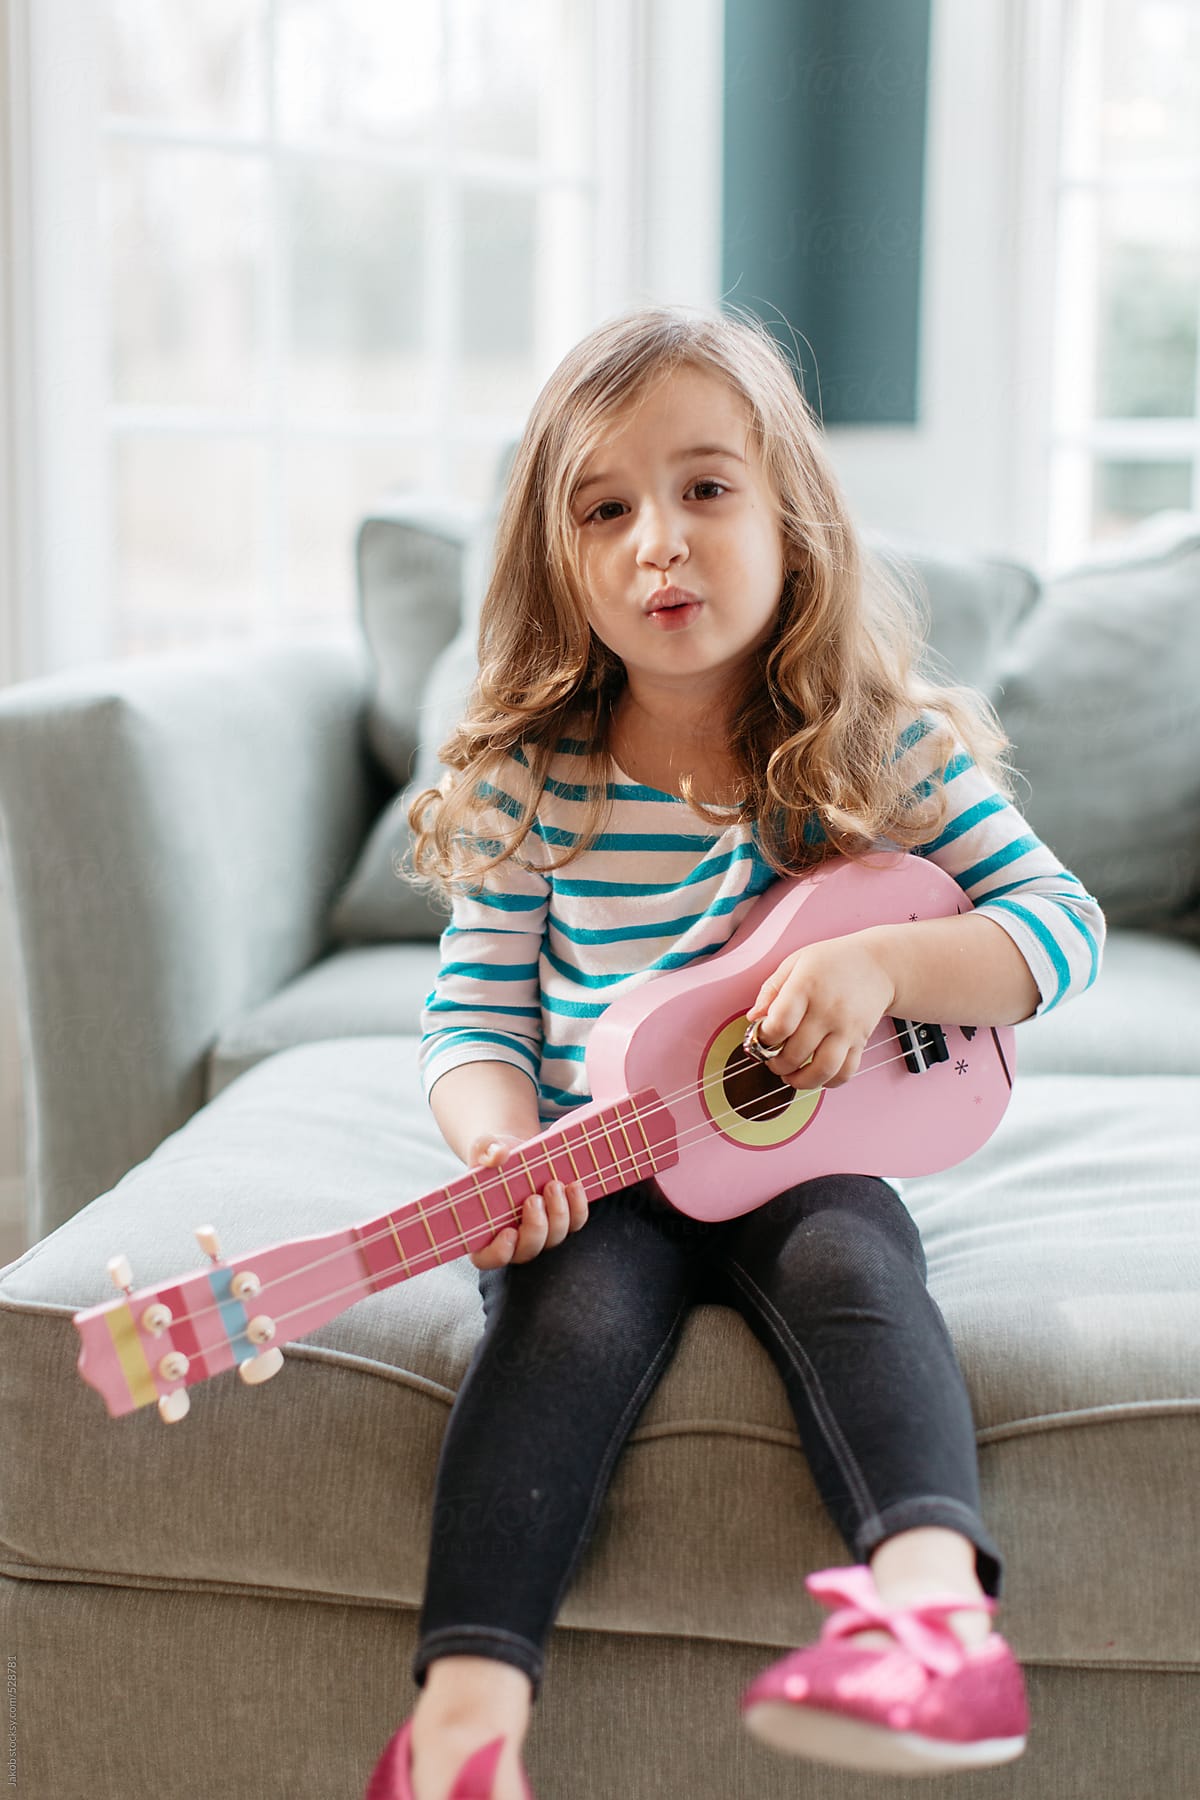 Cute toddler playing a toy guitar and singing a song